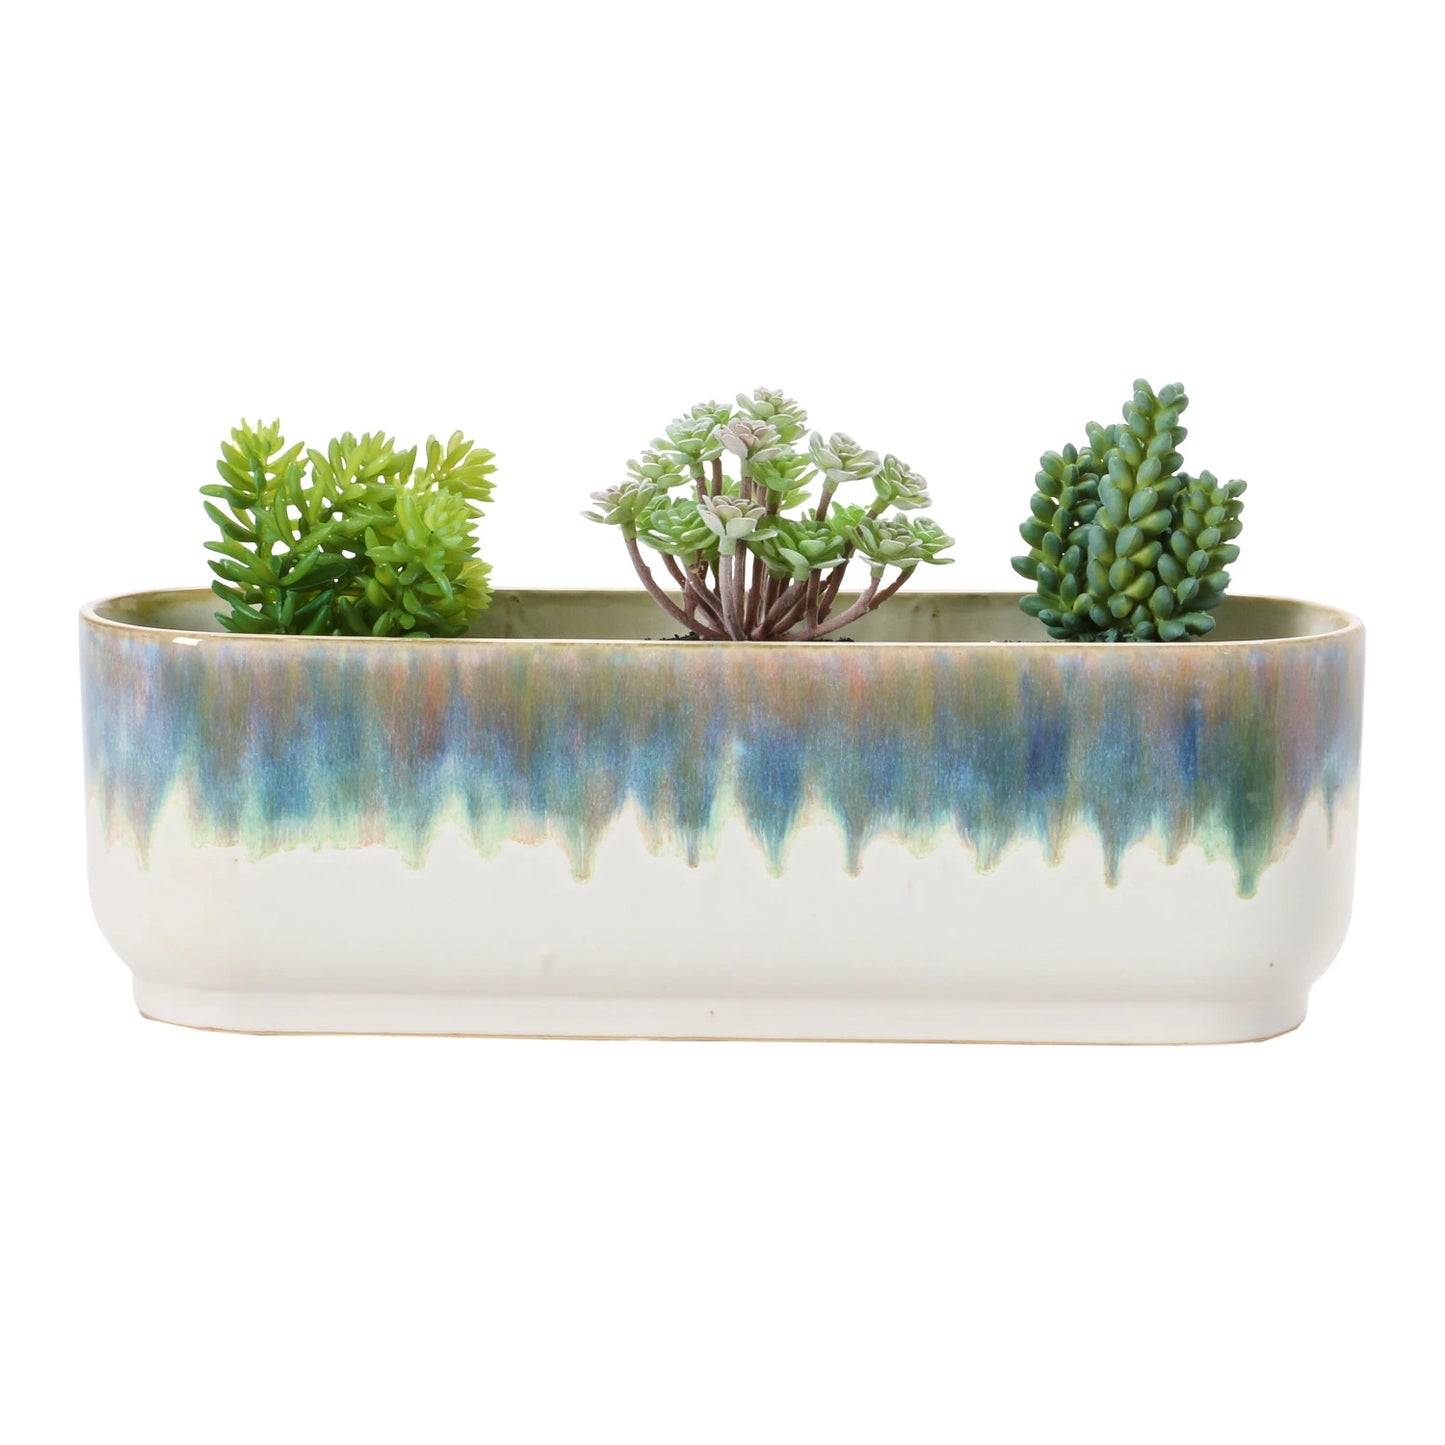 Stoneware Window Planter with 3 Sections